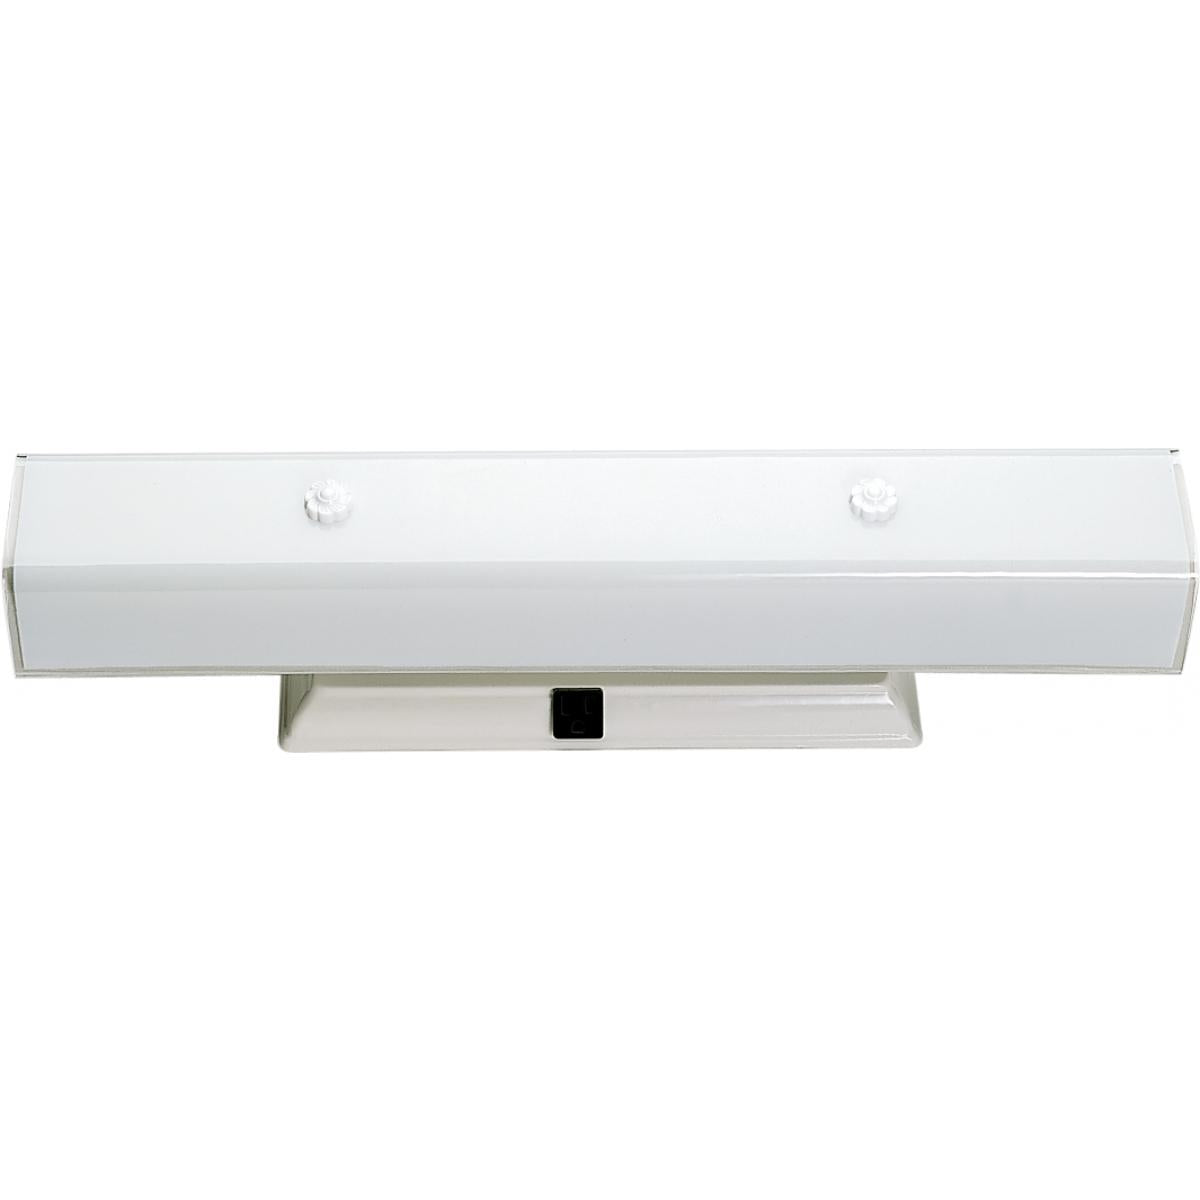 Satco 77-991 4 Light - 24" Vanity with White "U" Channel Glass with Convenience Outlet - White Finish